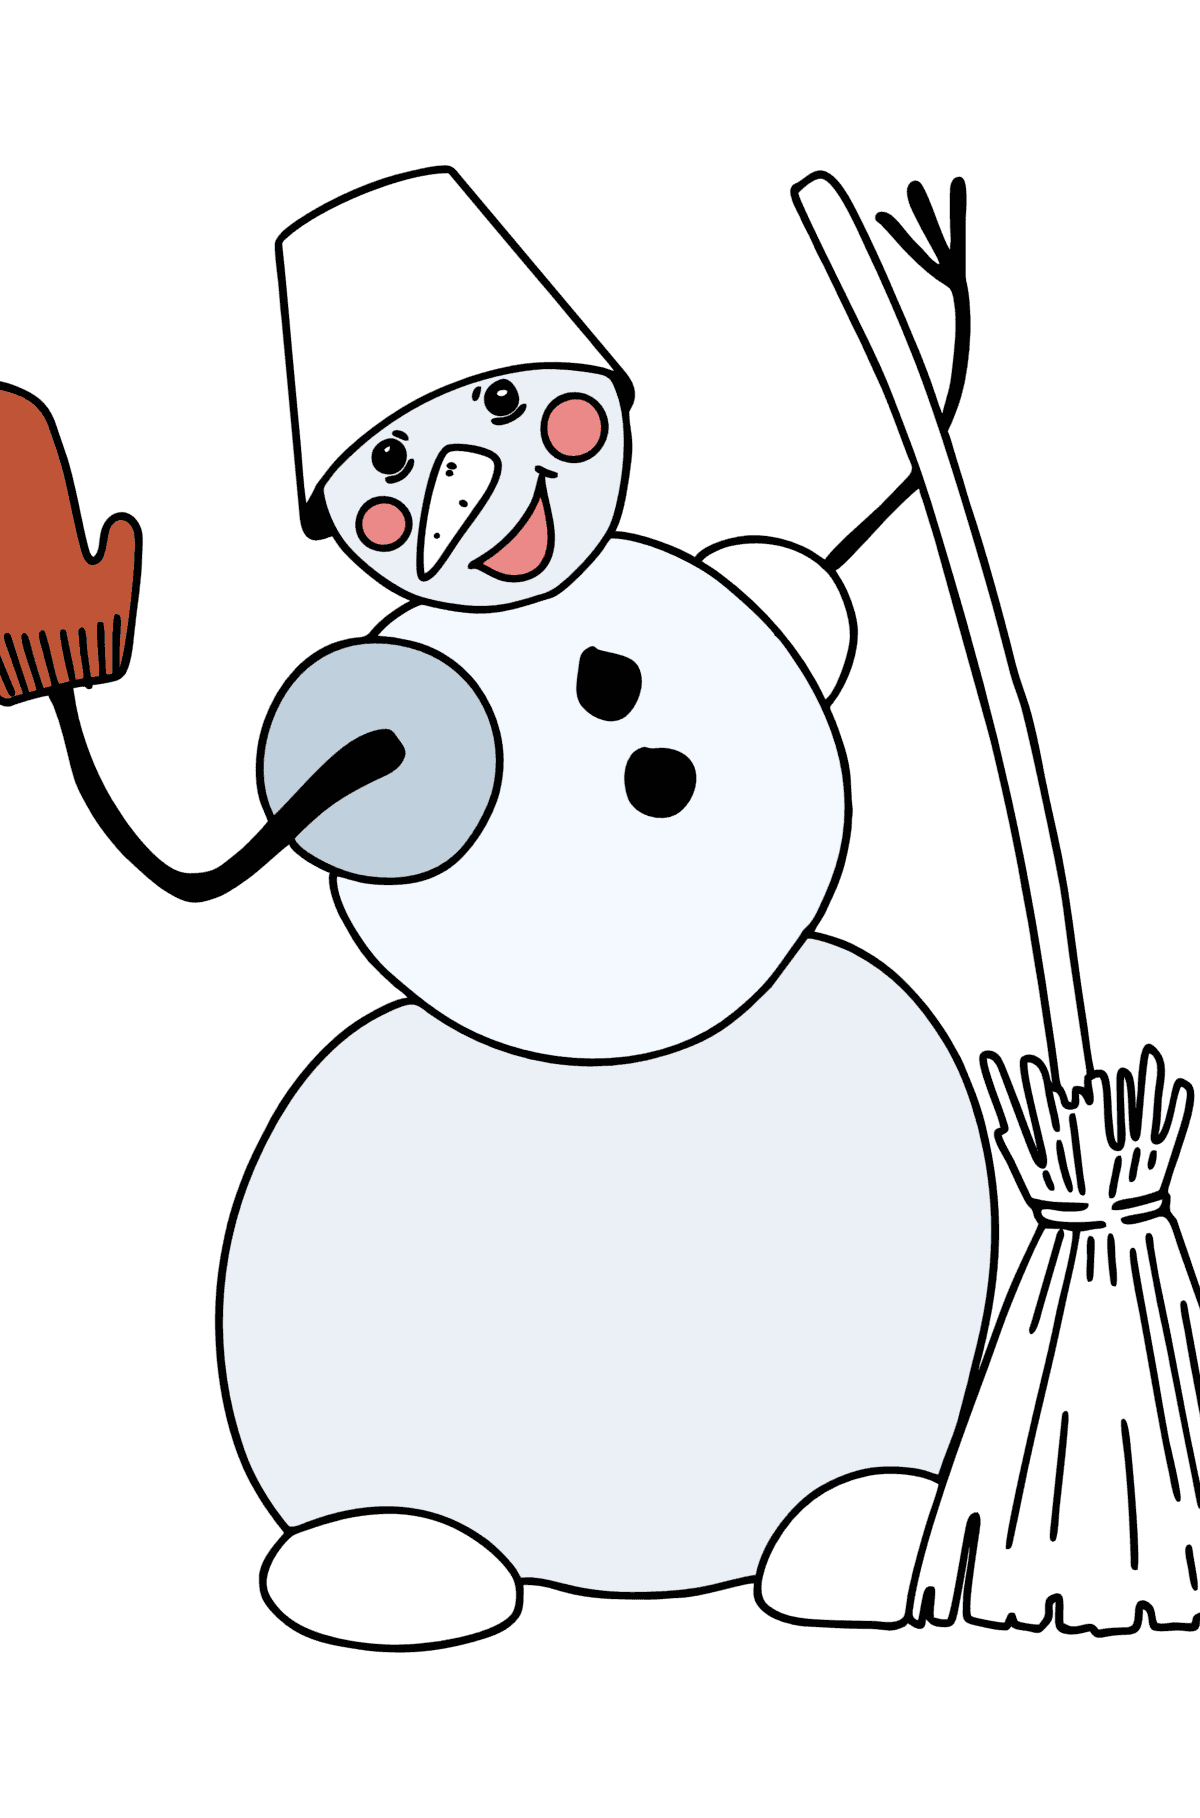 Snowman with Broom coloring page - Coloring Pages for Kids